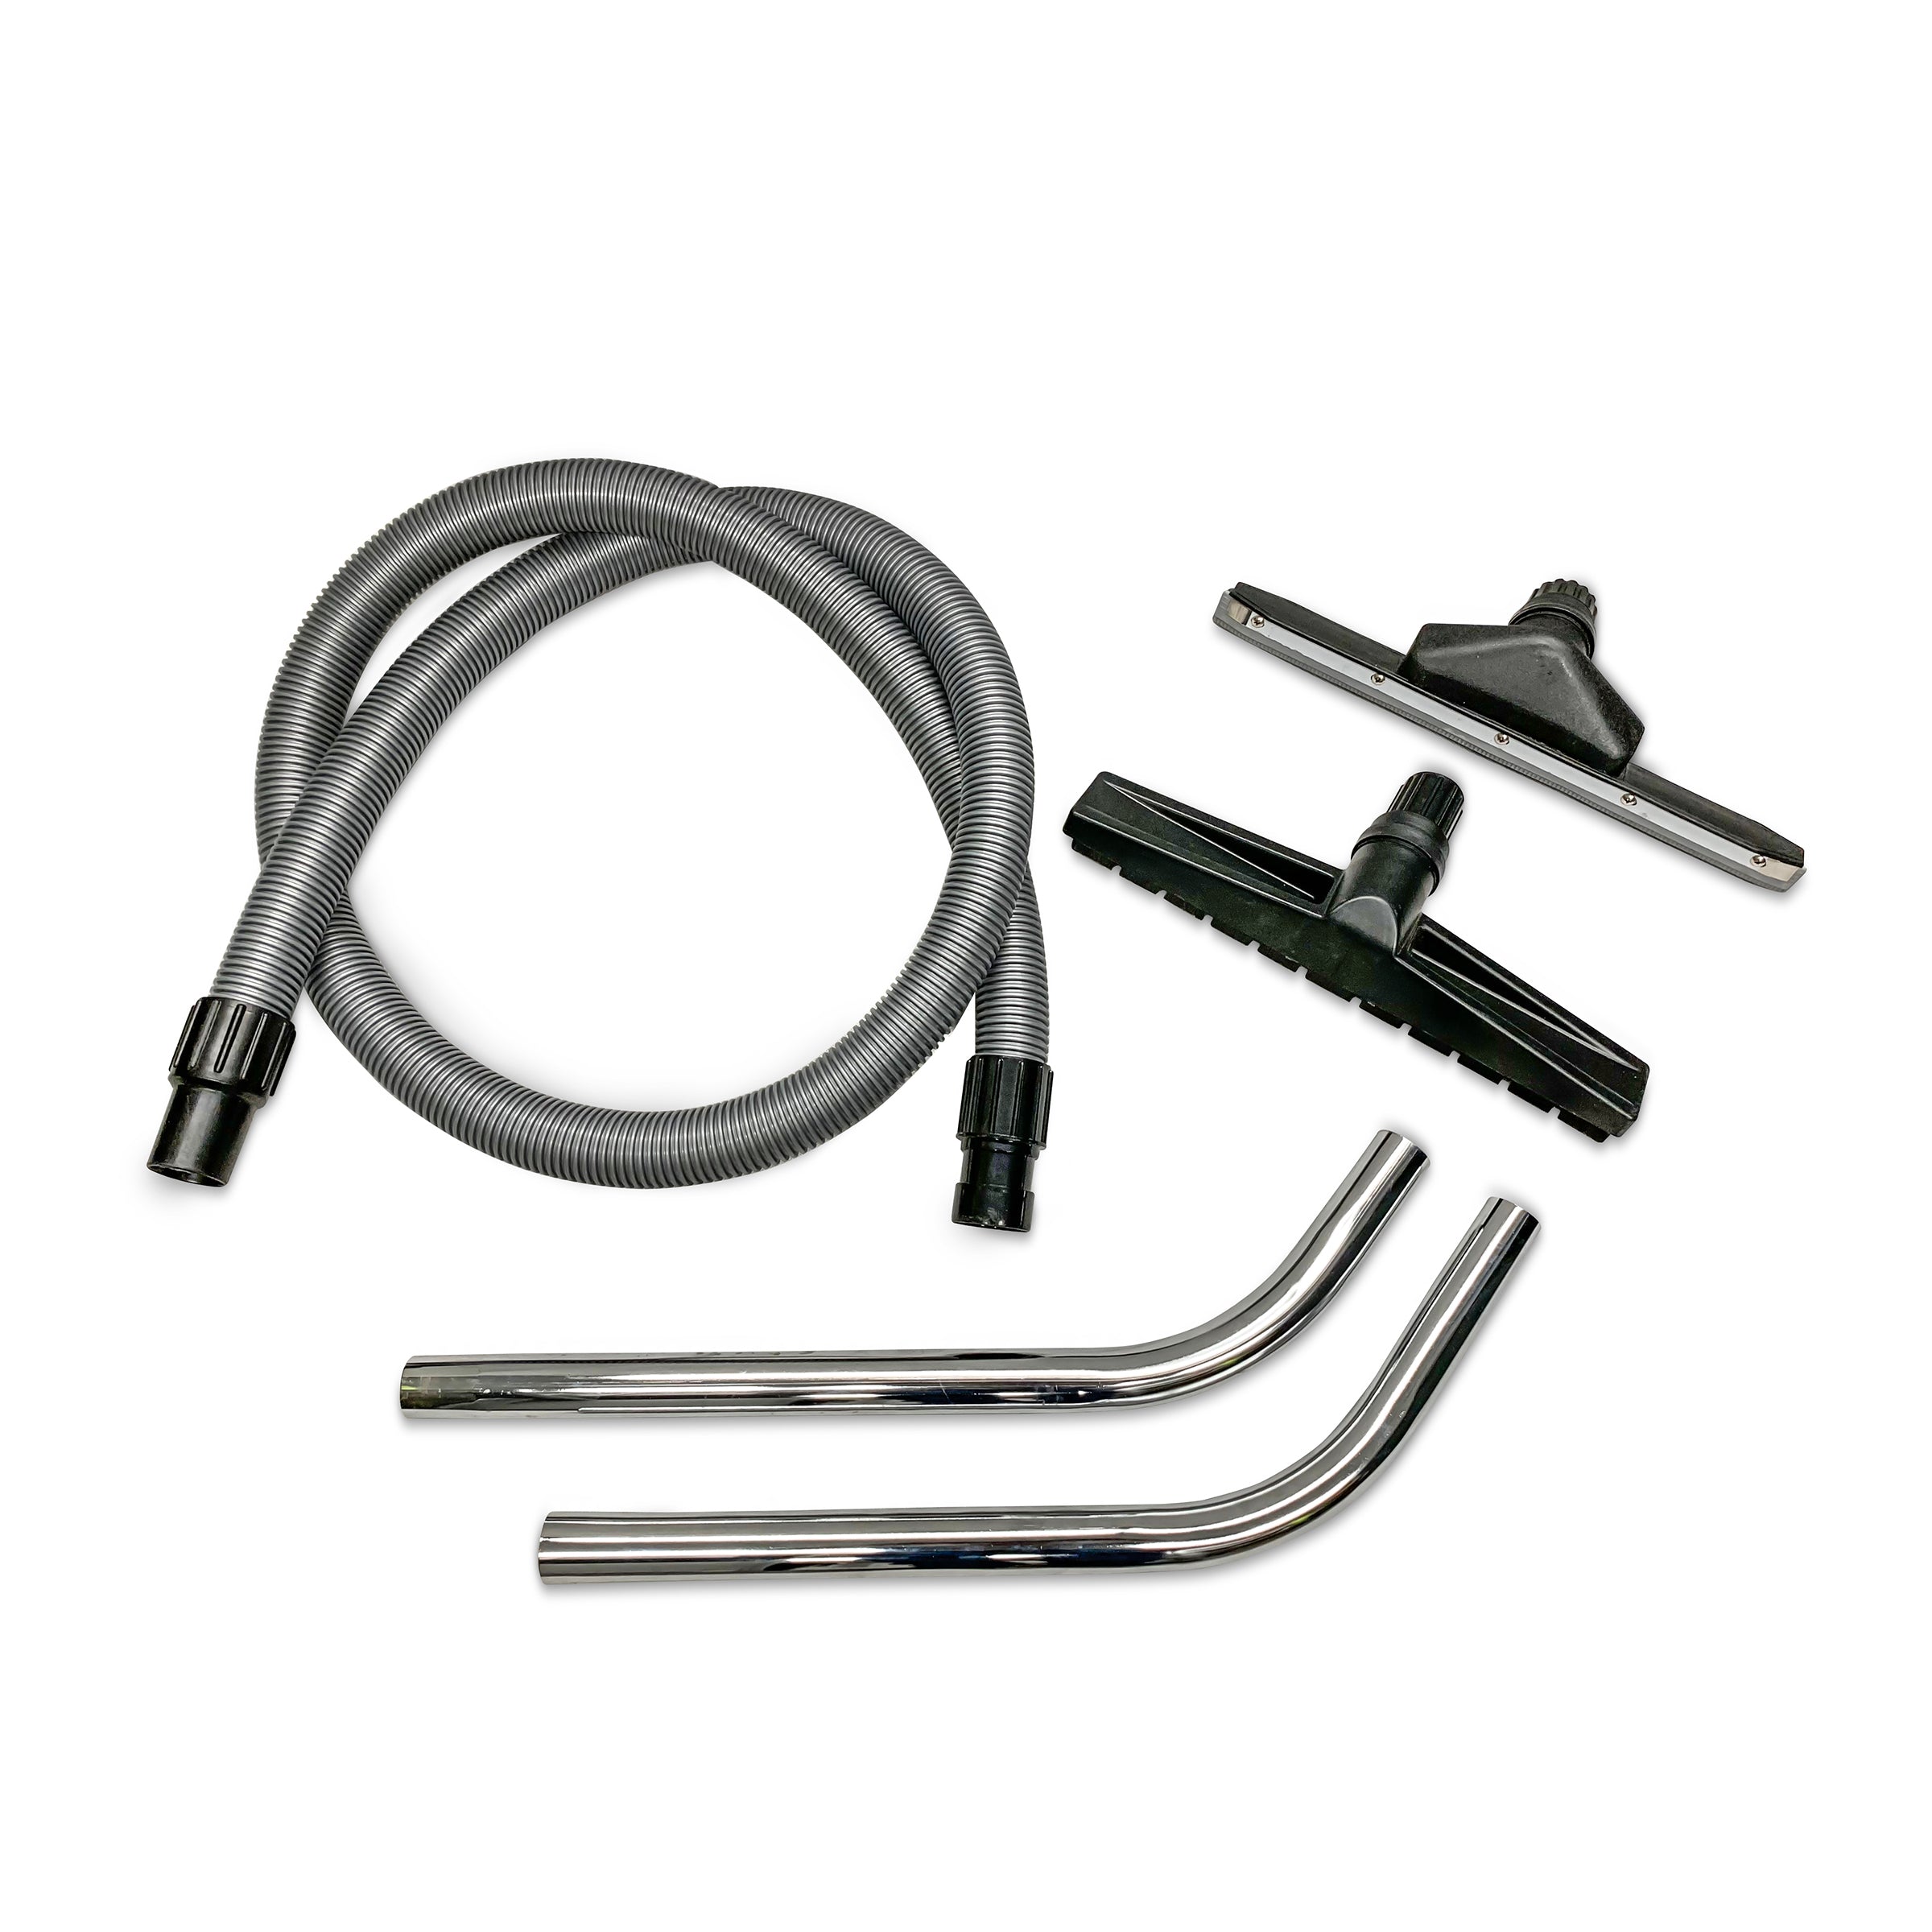 Industrial vacuum cleaner hose and head attachments